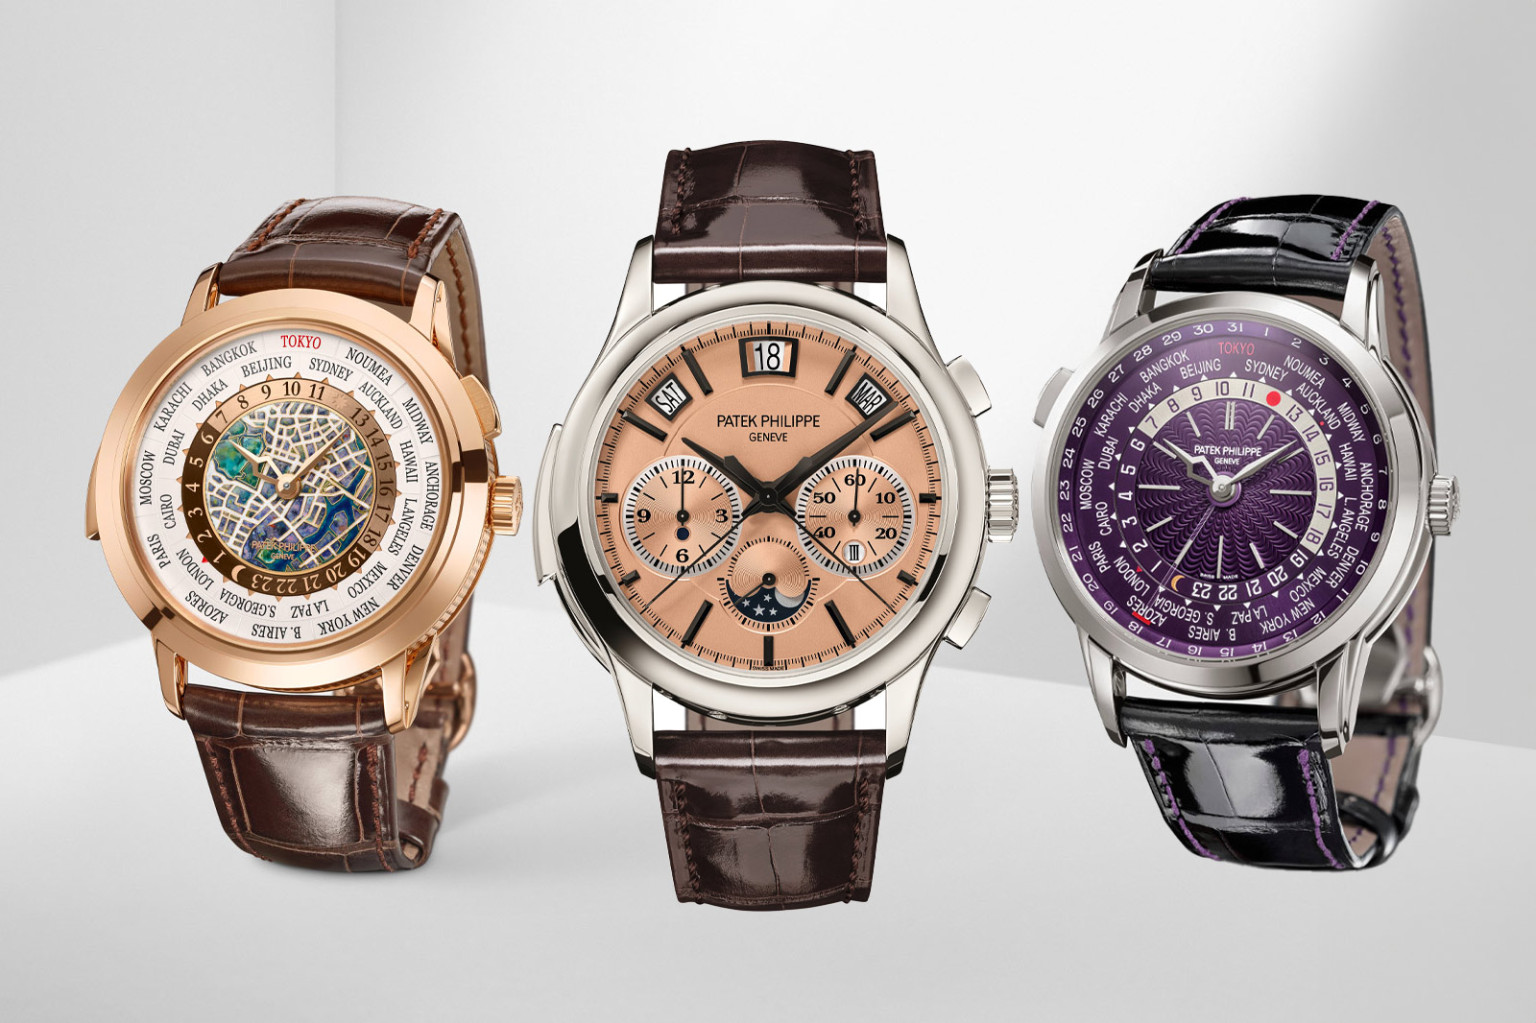 Three highly complicated Patek Philippes in Tokyo